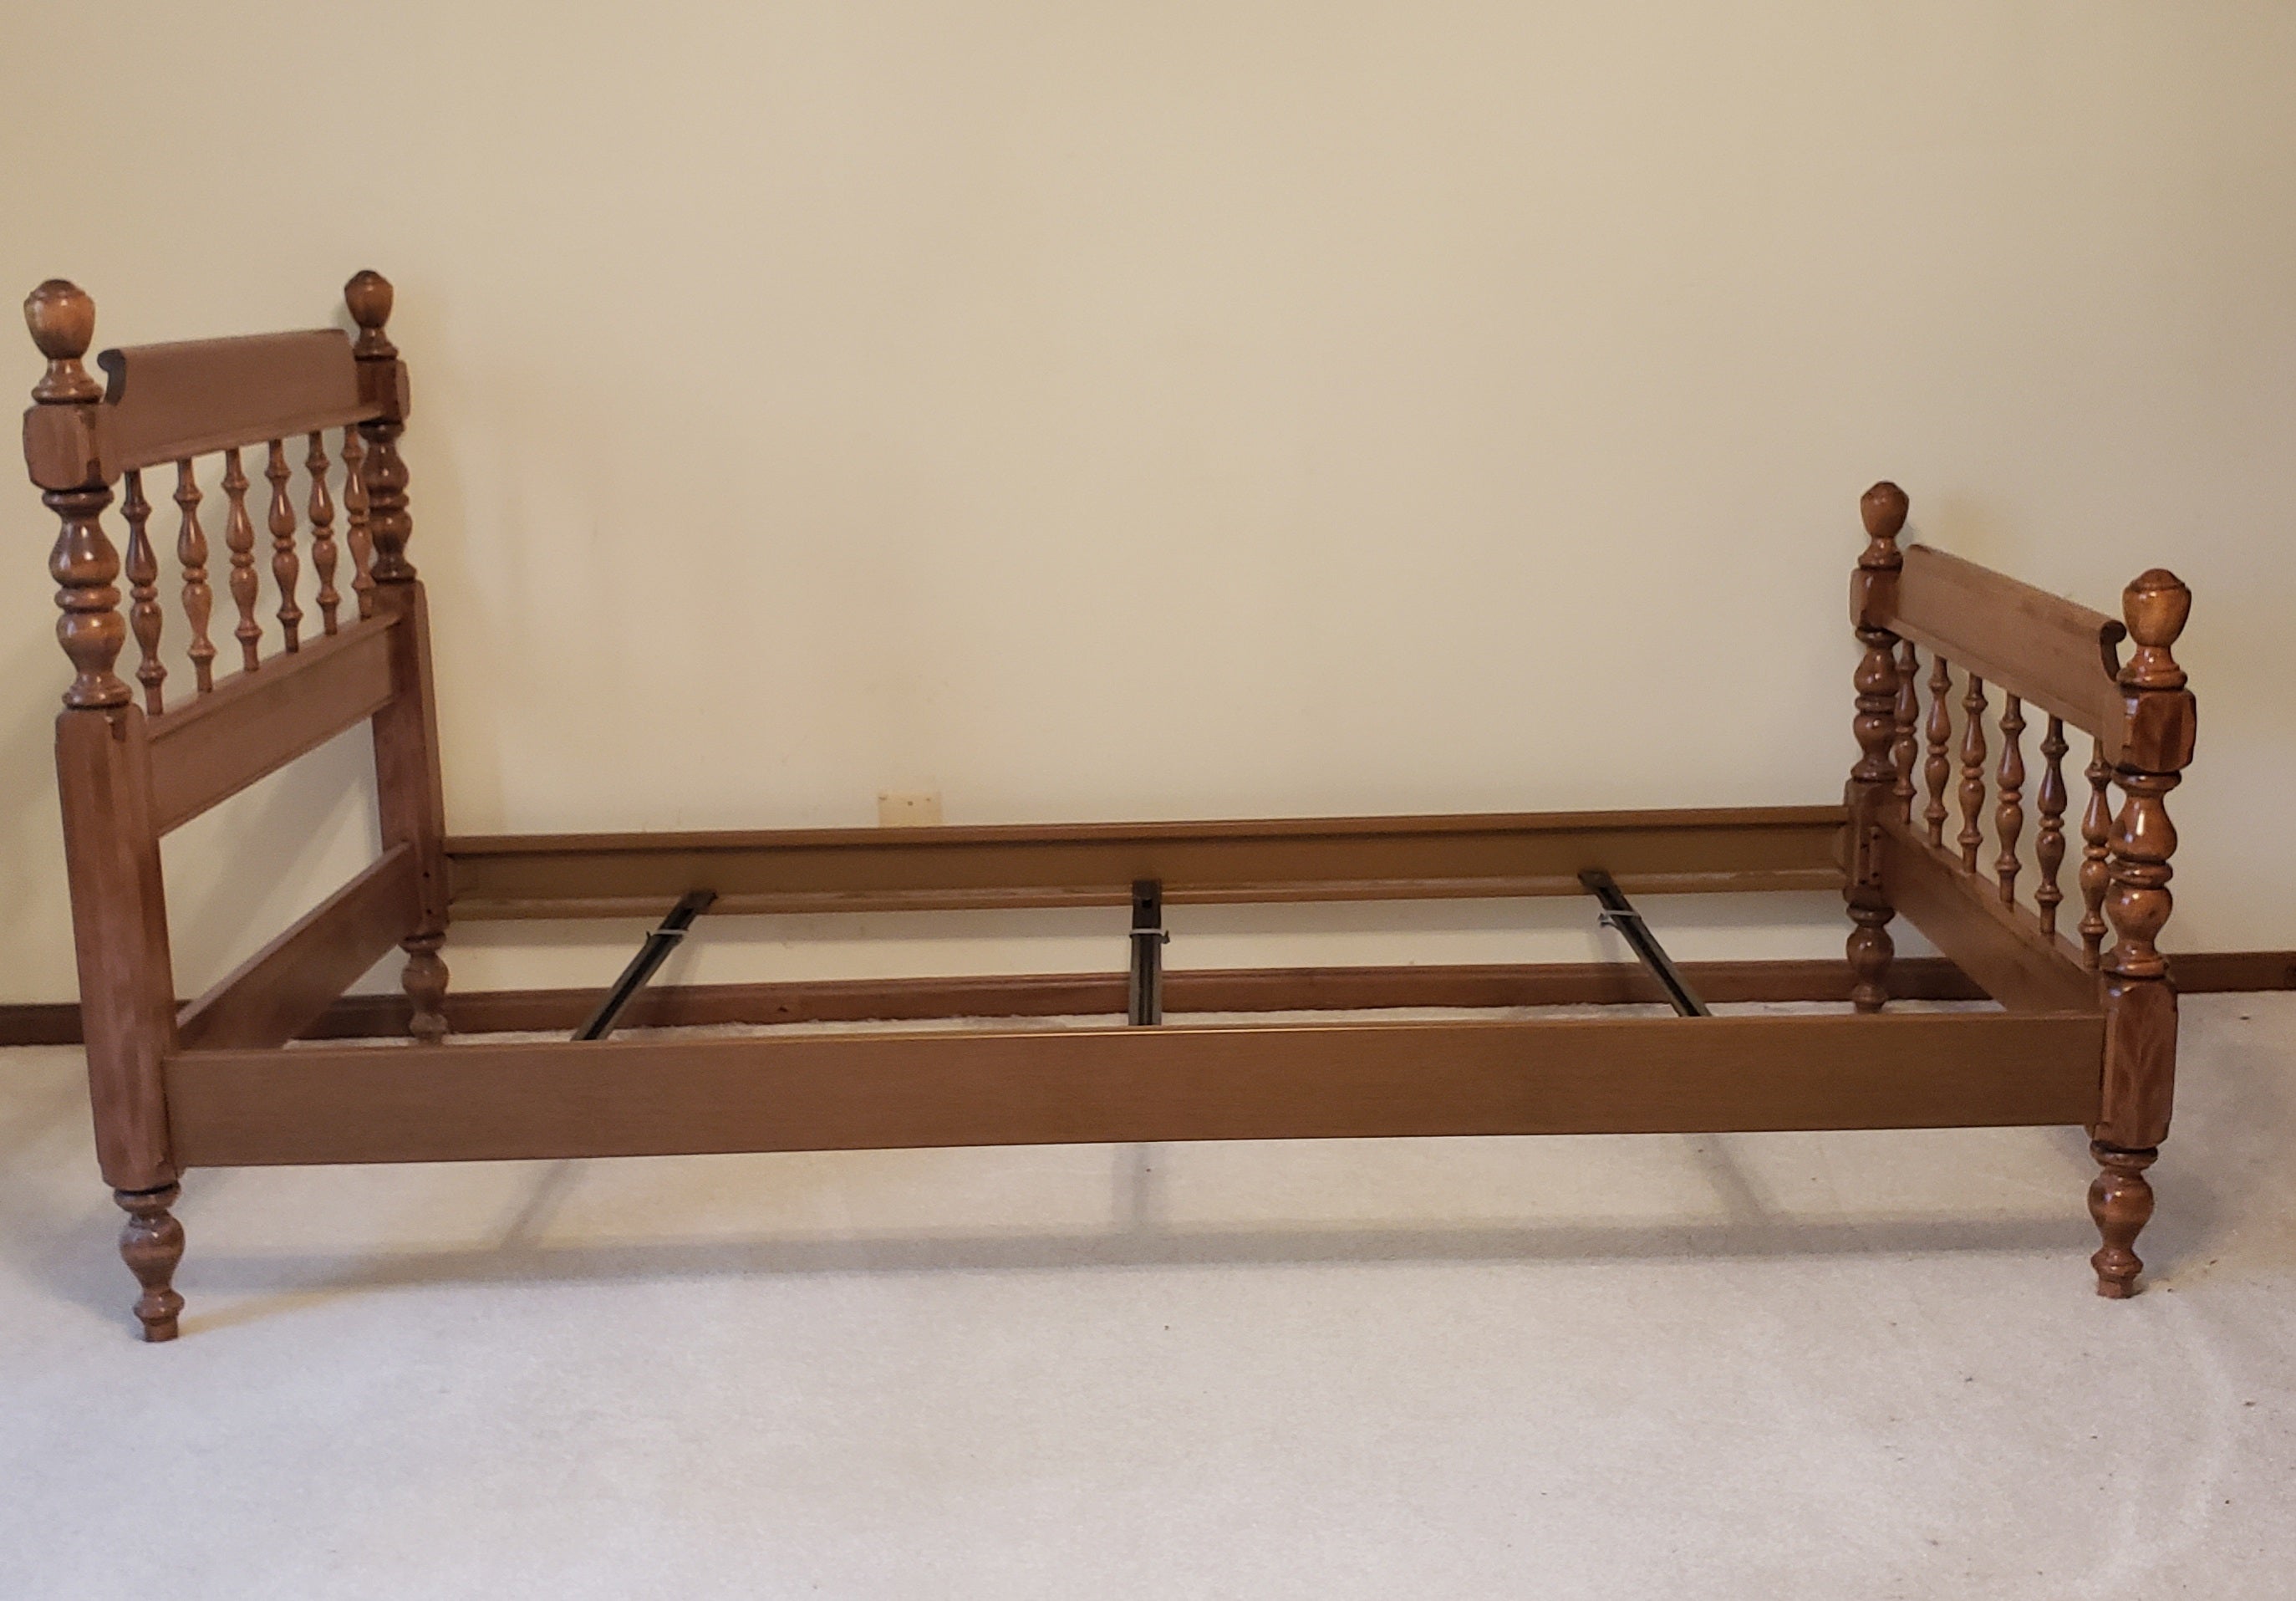 Beautiful pair of twin bed frames by Ethan Allen. Solid maple and exquisite spindles. Faux maple metal slats and side rails. Very good vintage condition.

Measures 42